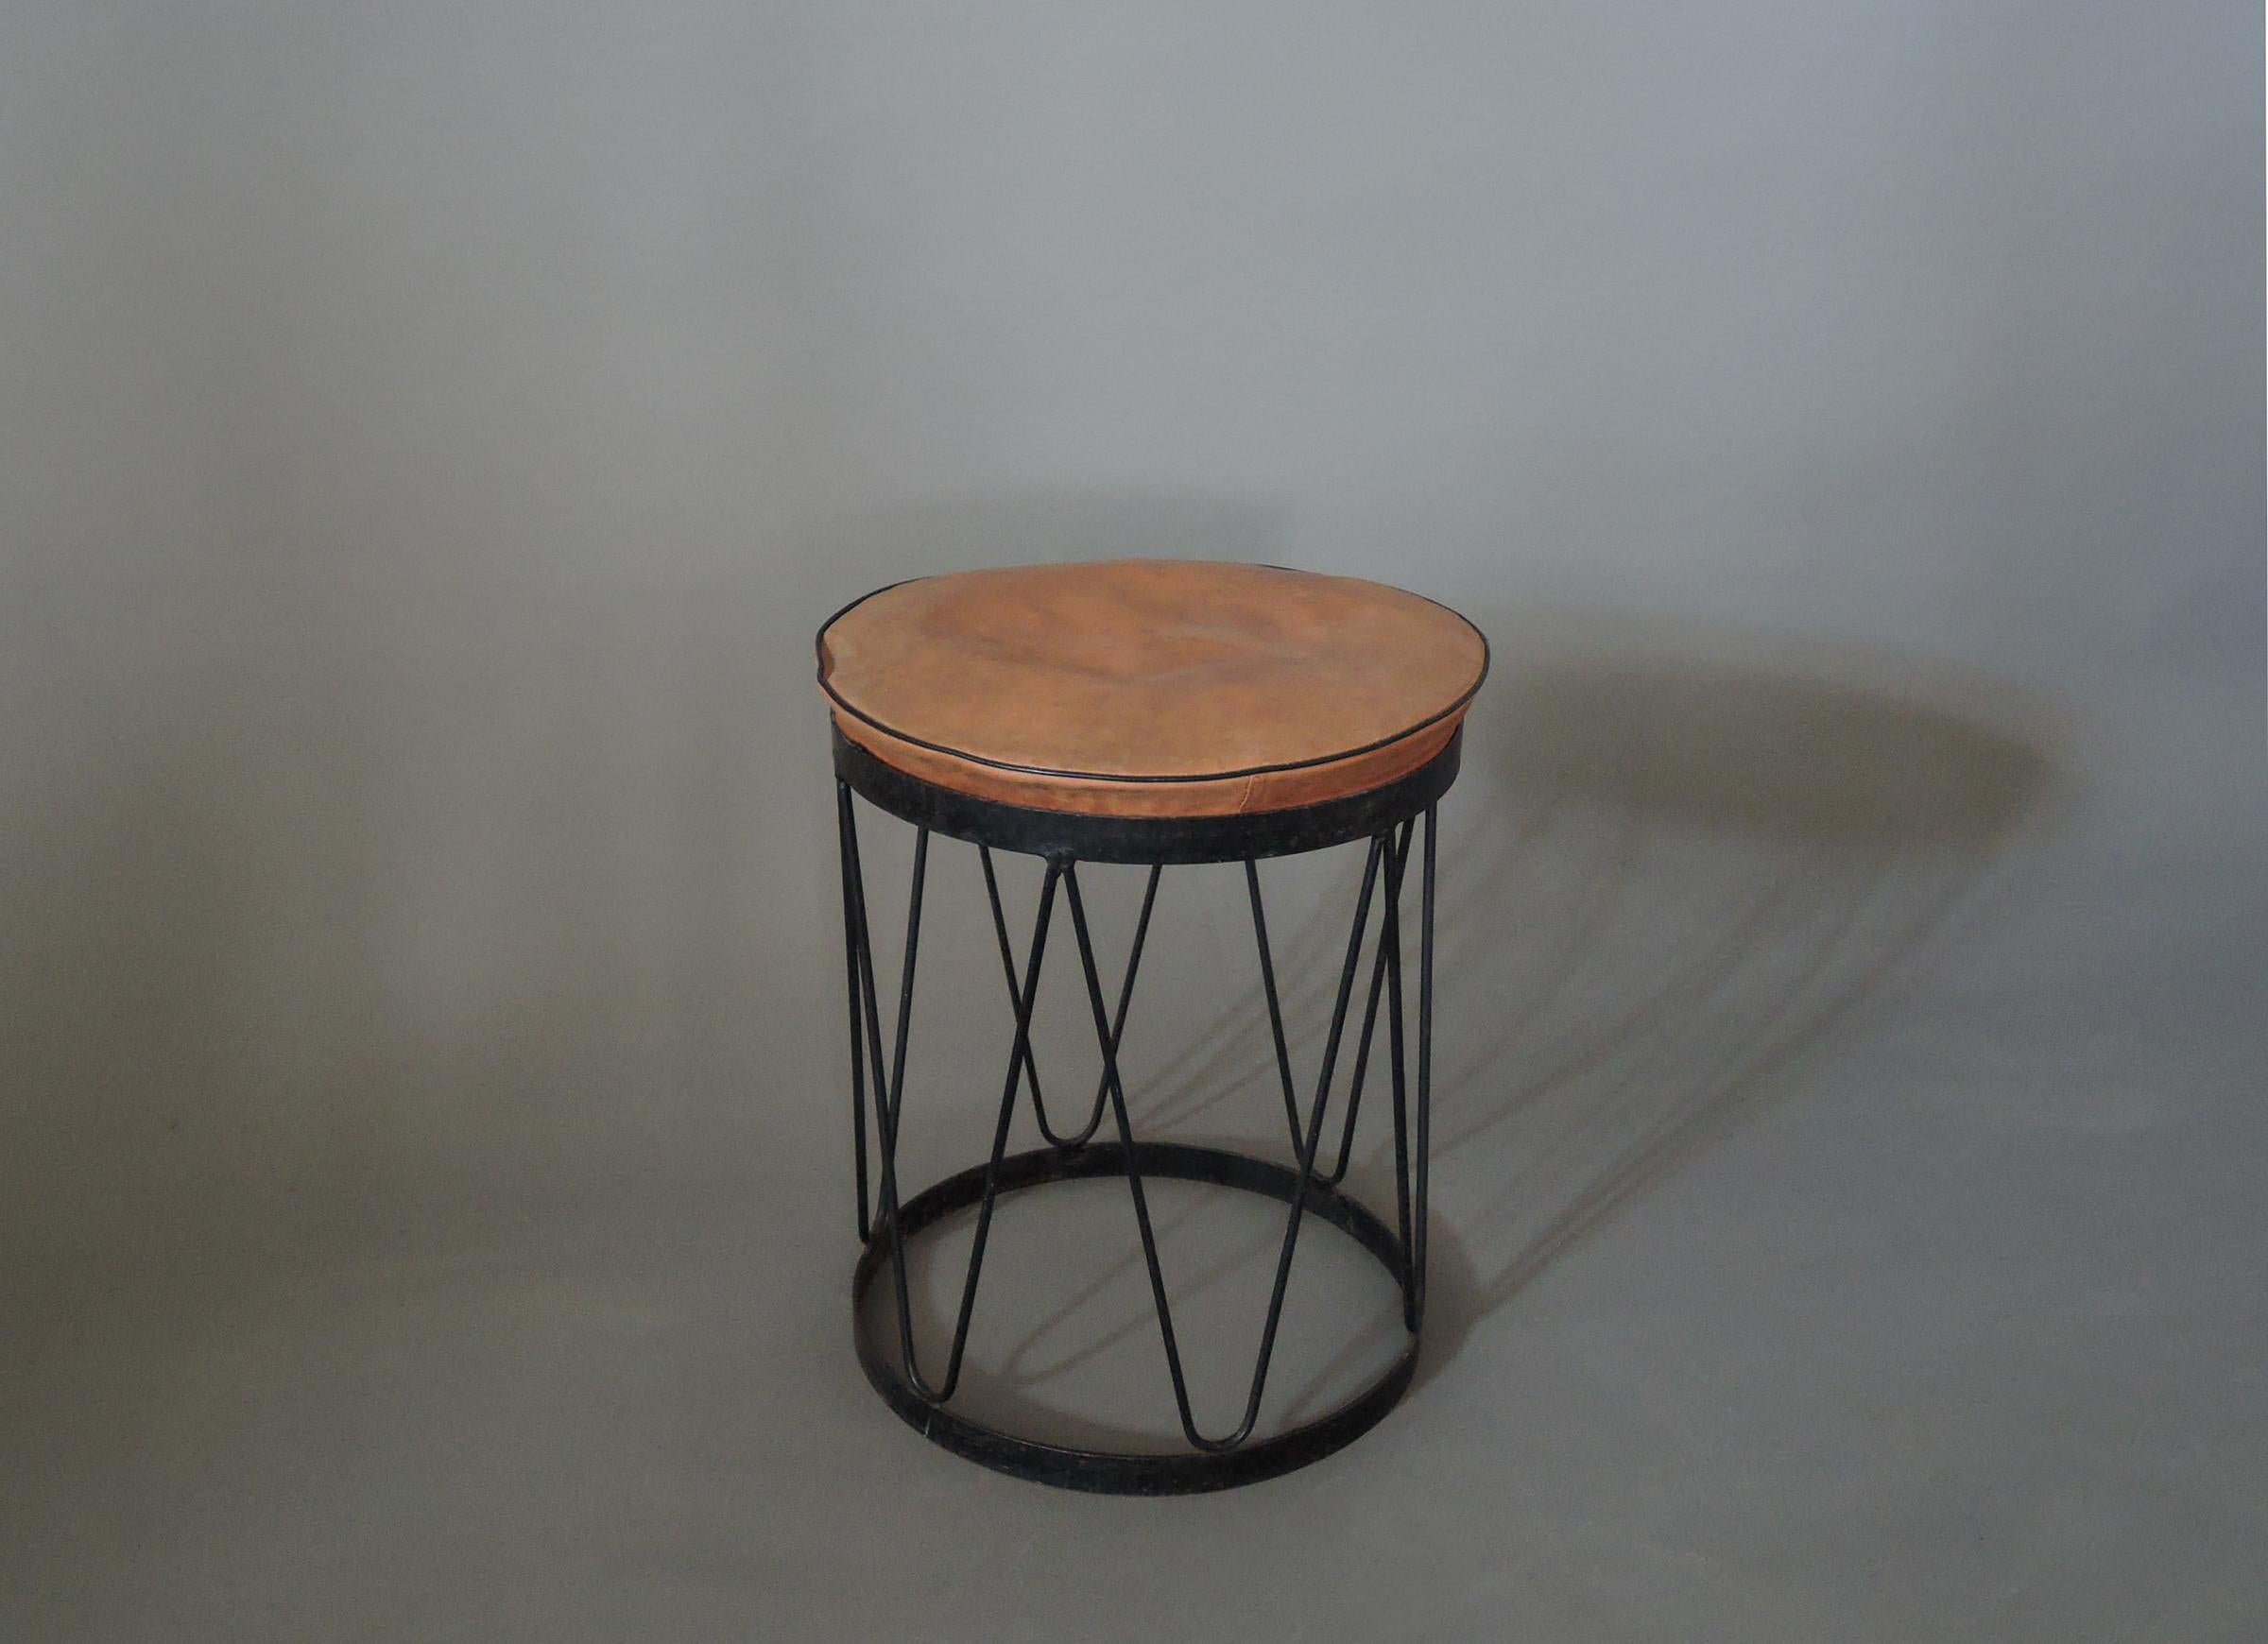 A fine French mid-century round stool with a black lacquered metal base and a leather cushion.